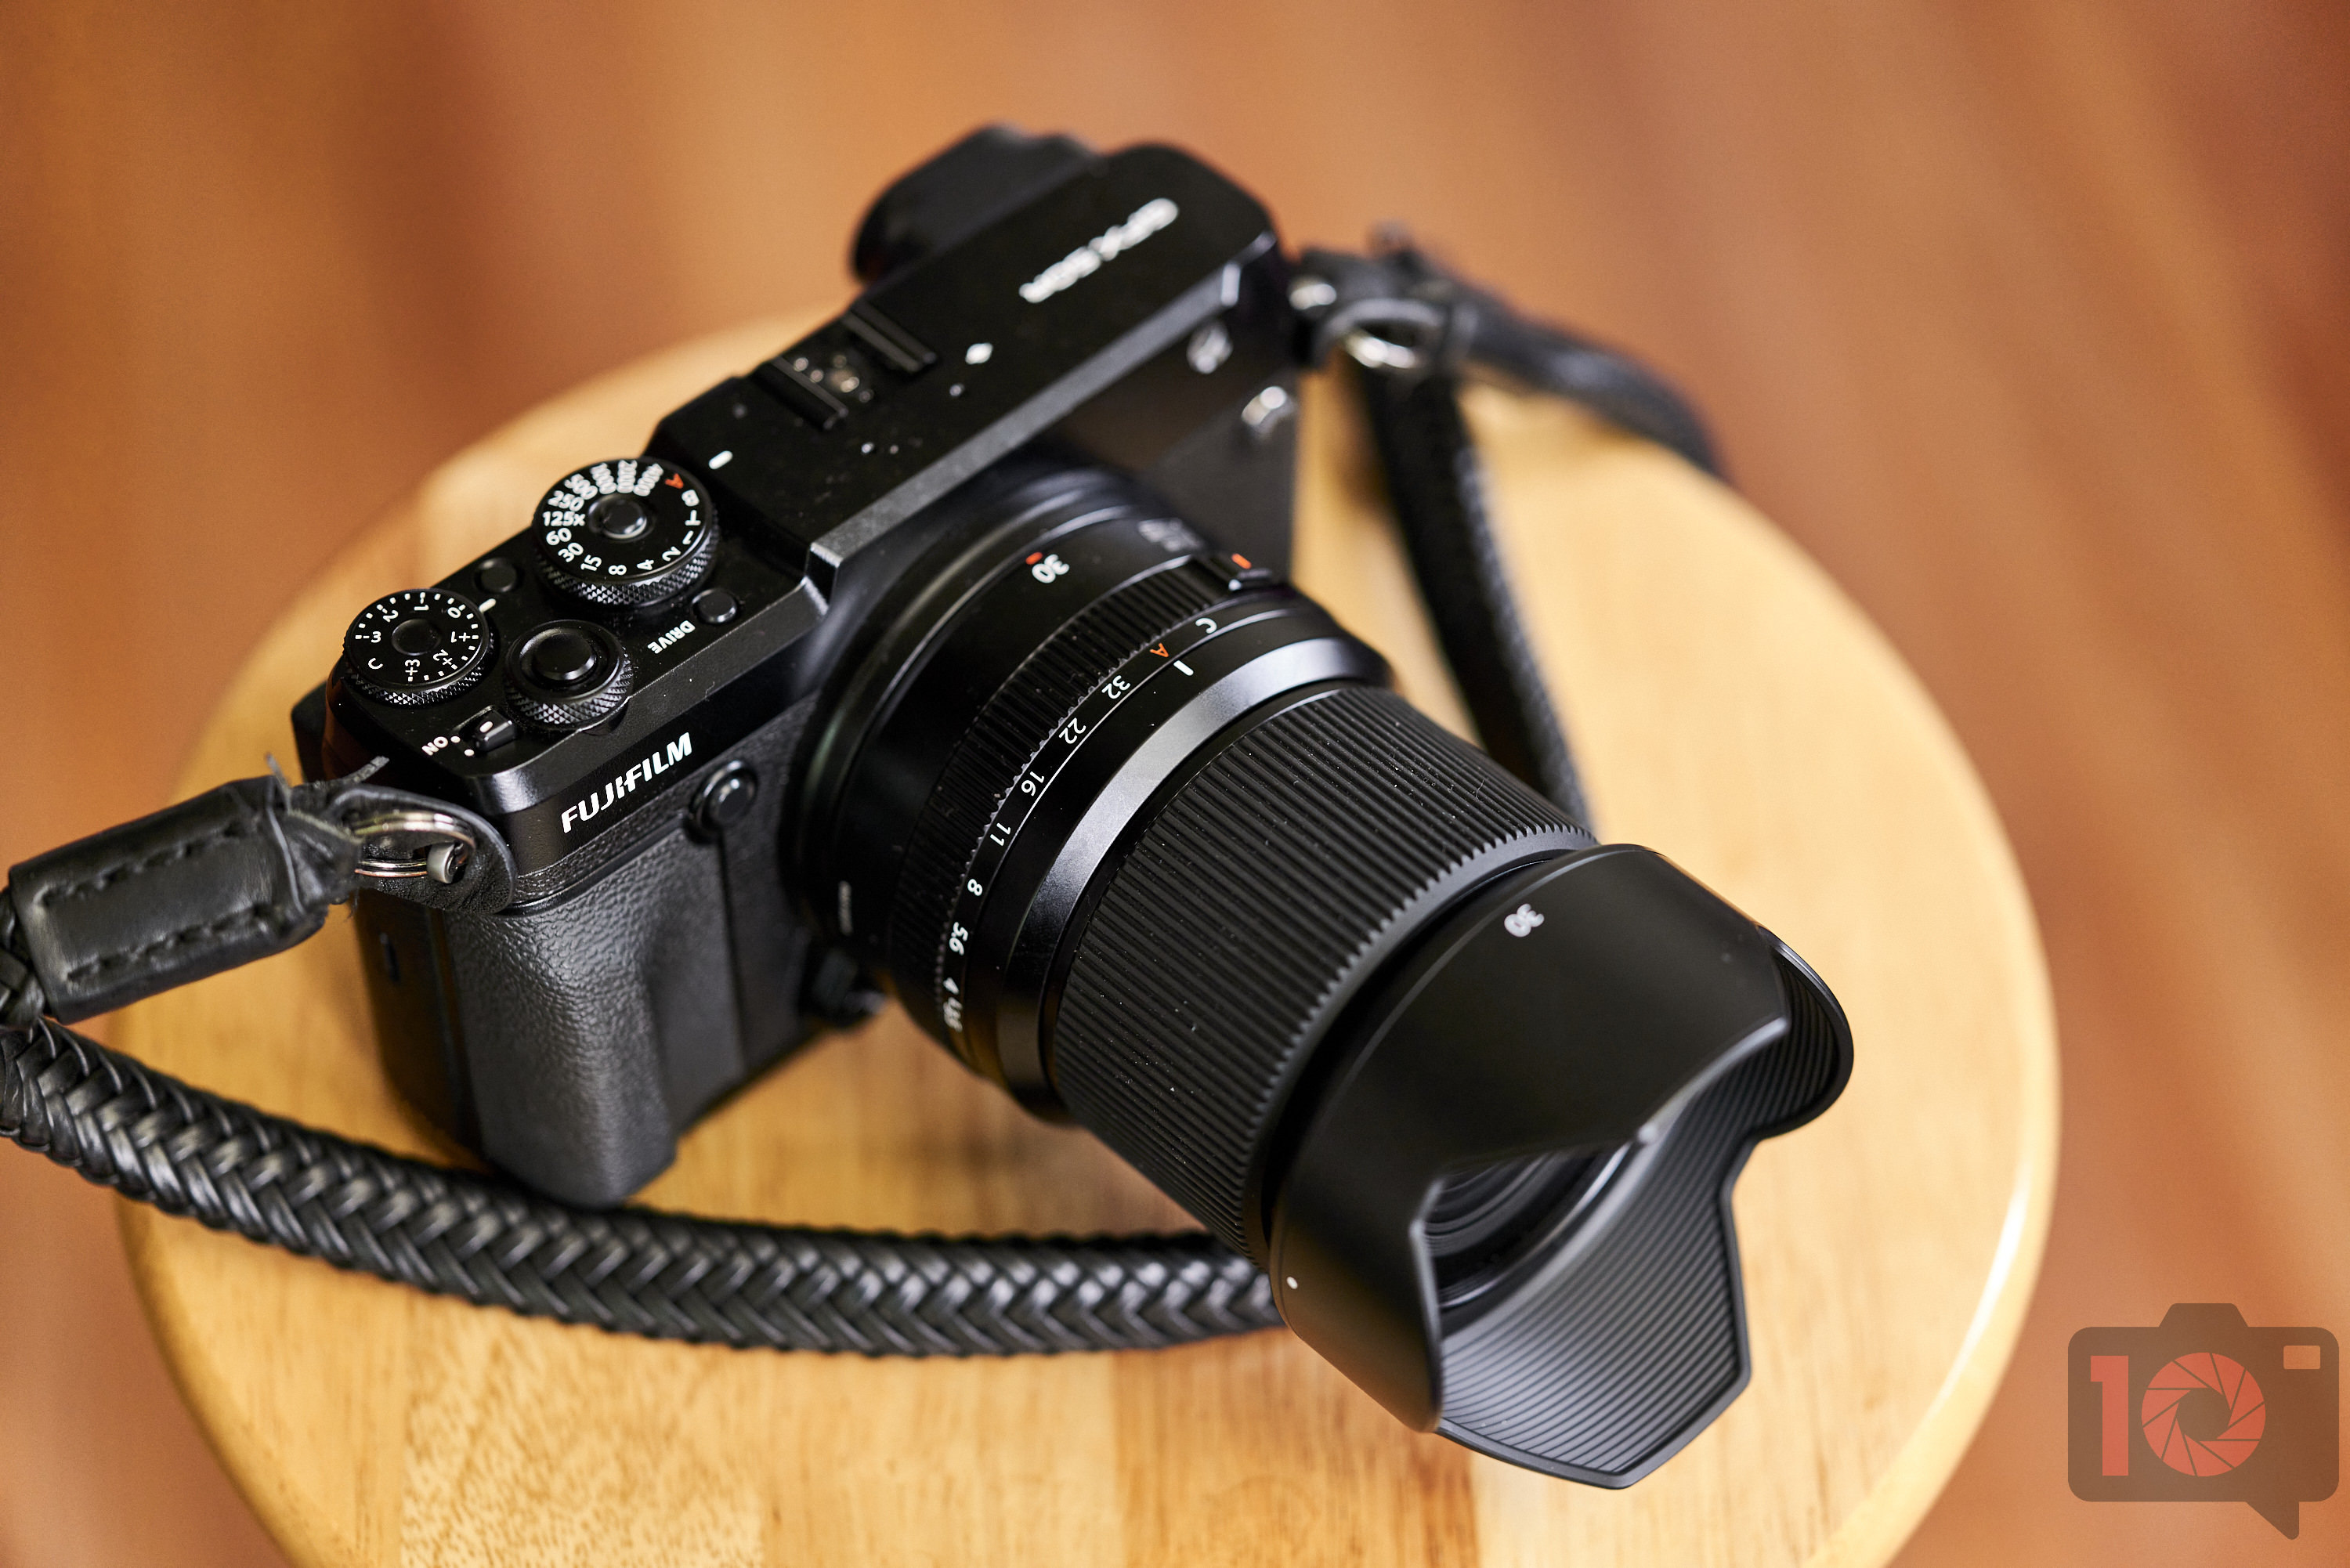 Chris Gampat The Phoblographer Fujifilm 30mm f3.5 review product images 21-160s1600